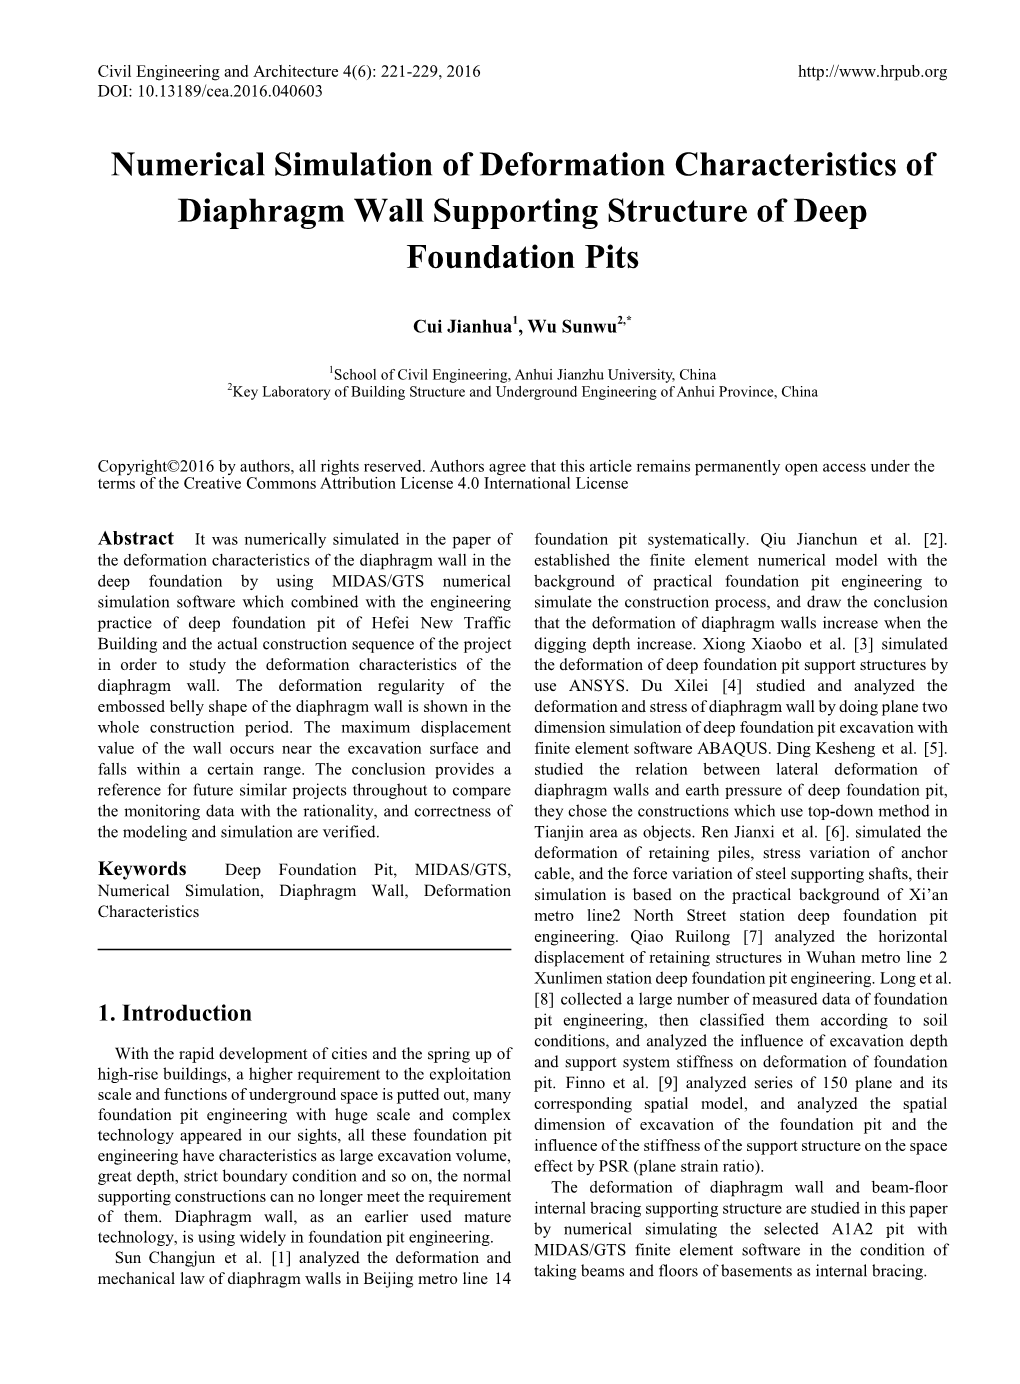 Numerical Simulation of Deformation Characteristics of Diaphragm Wall Supporting Structure of Deep Foundation Pits